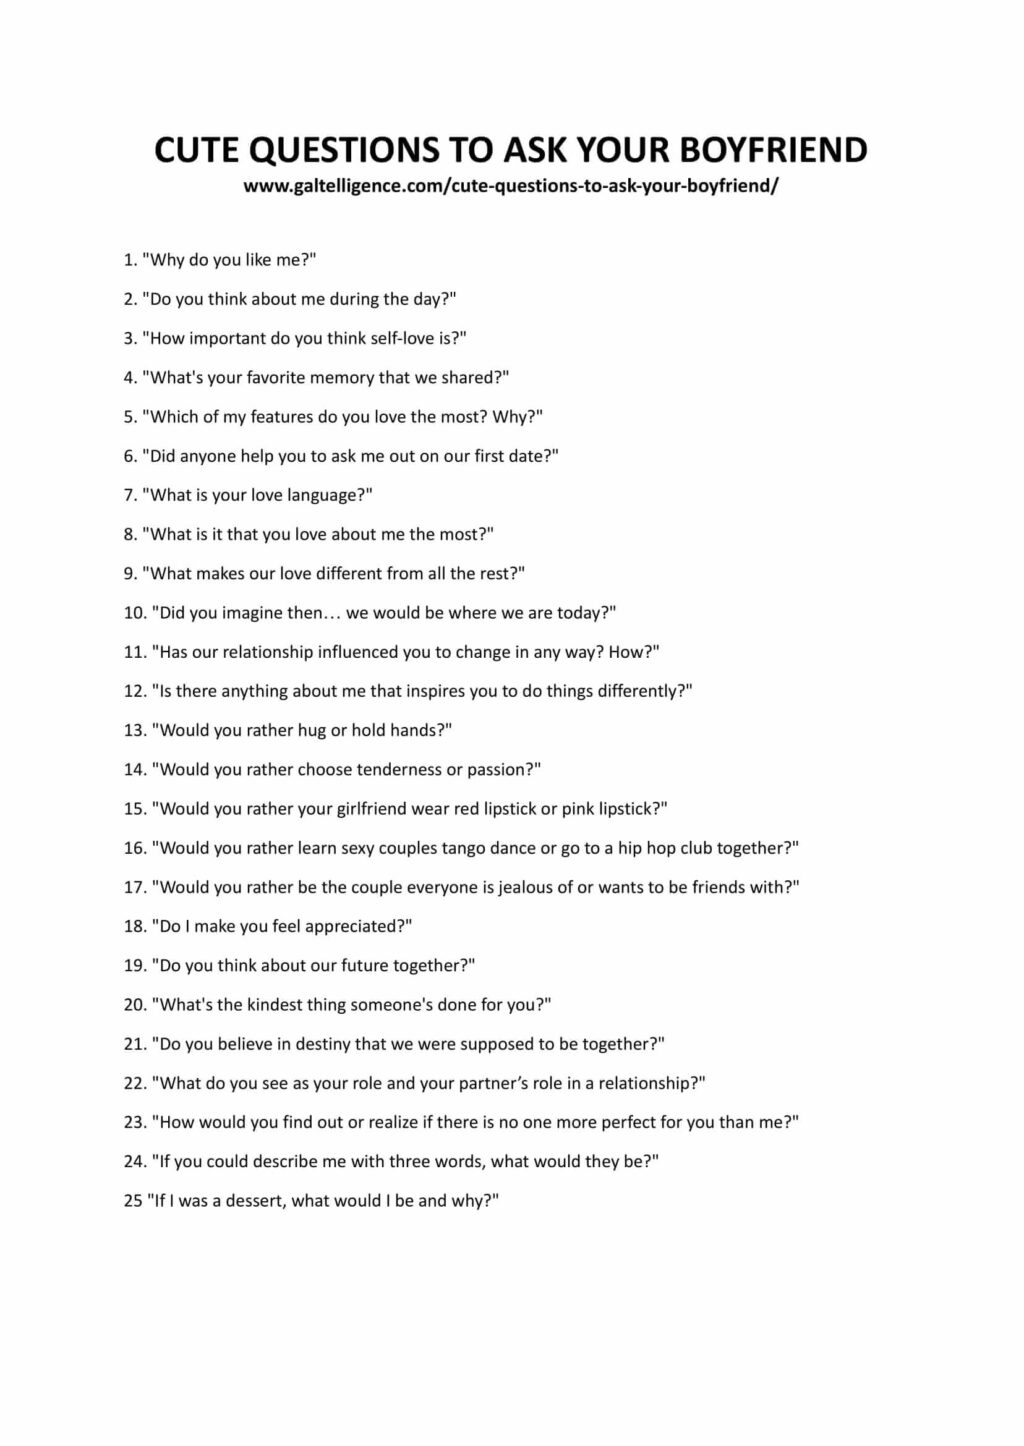 Downloadable and printable list of questions